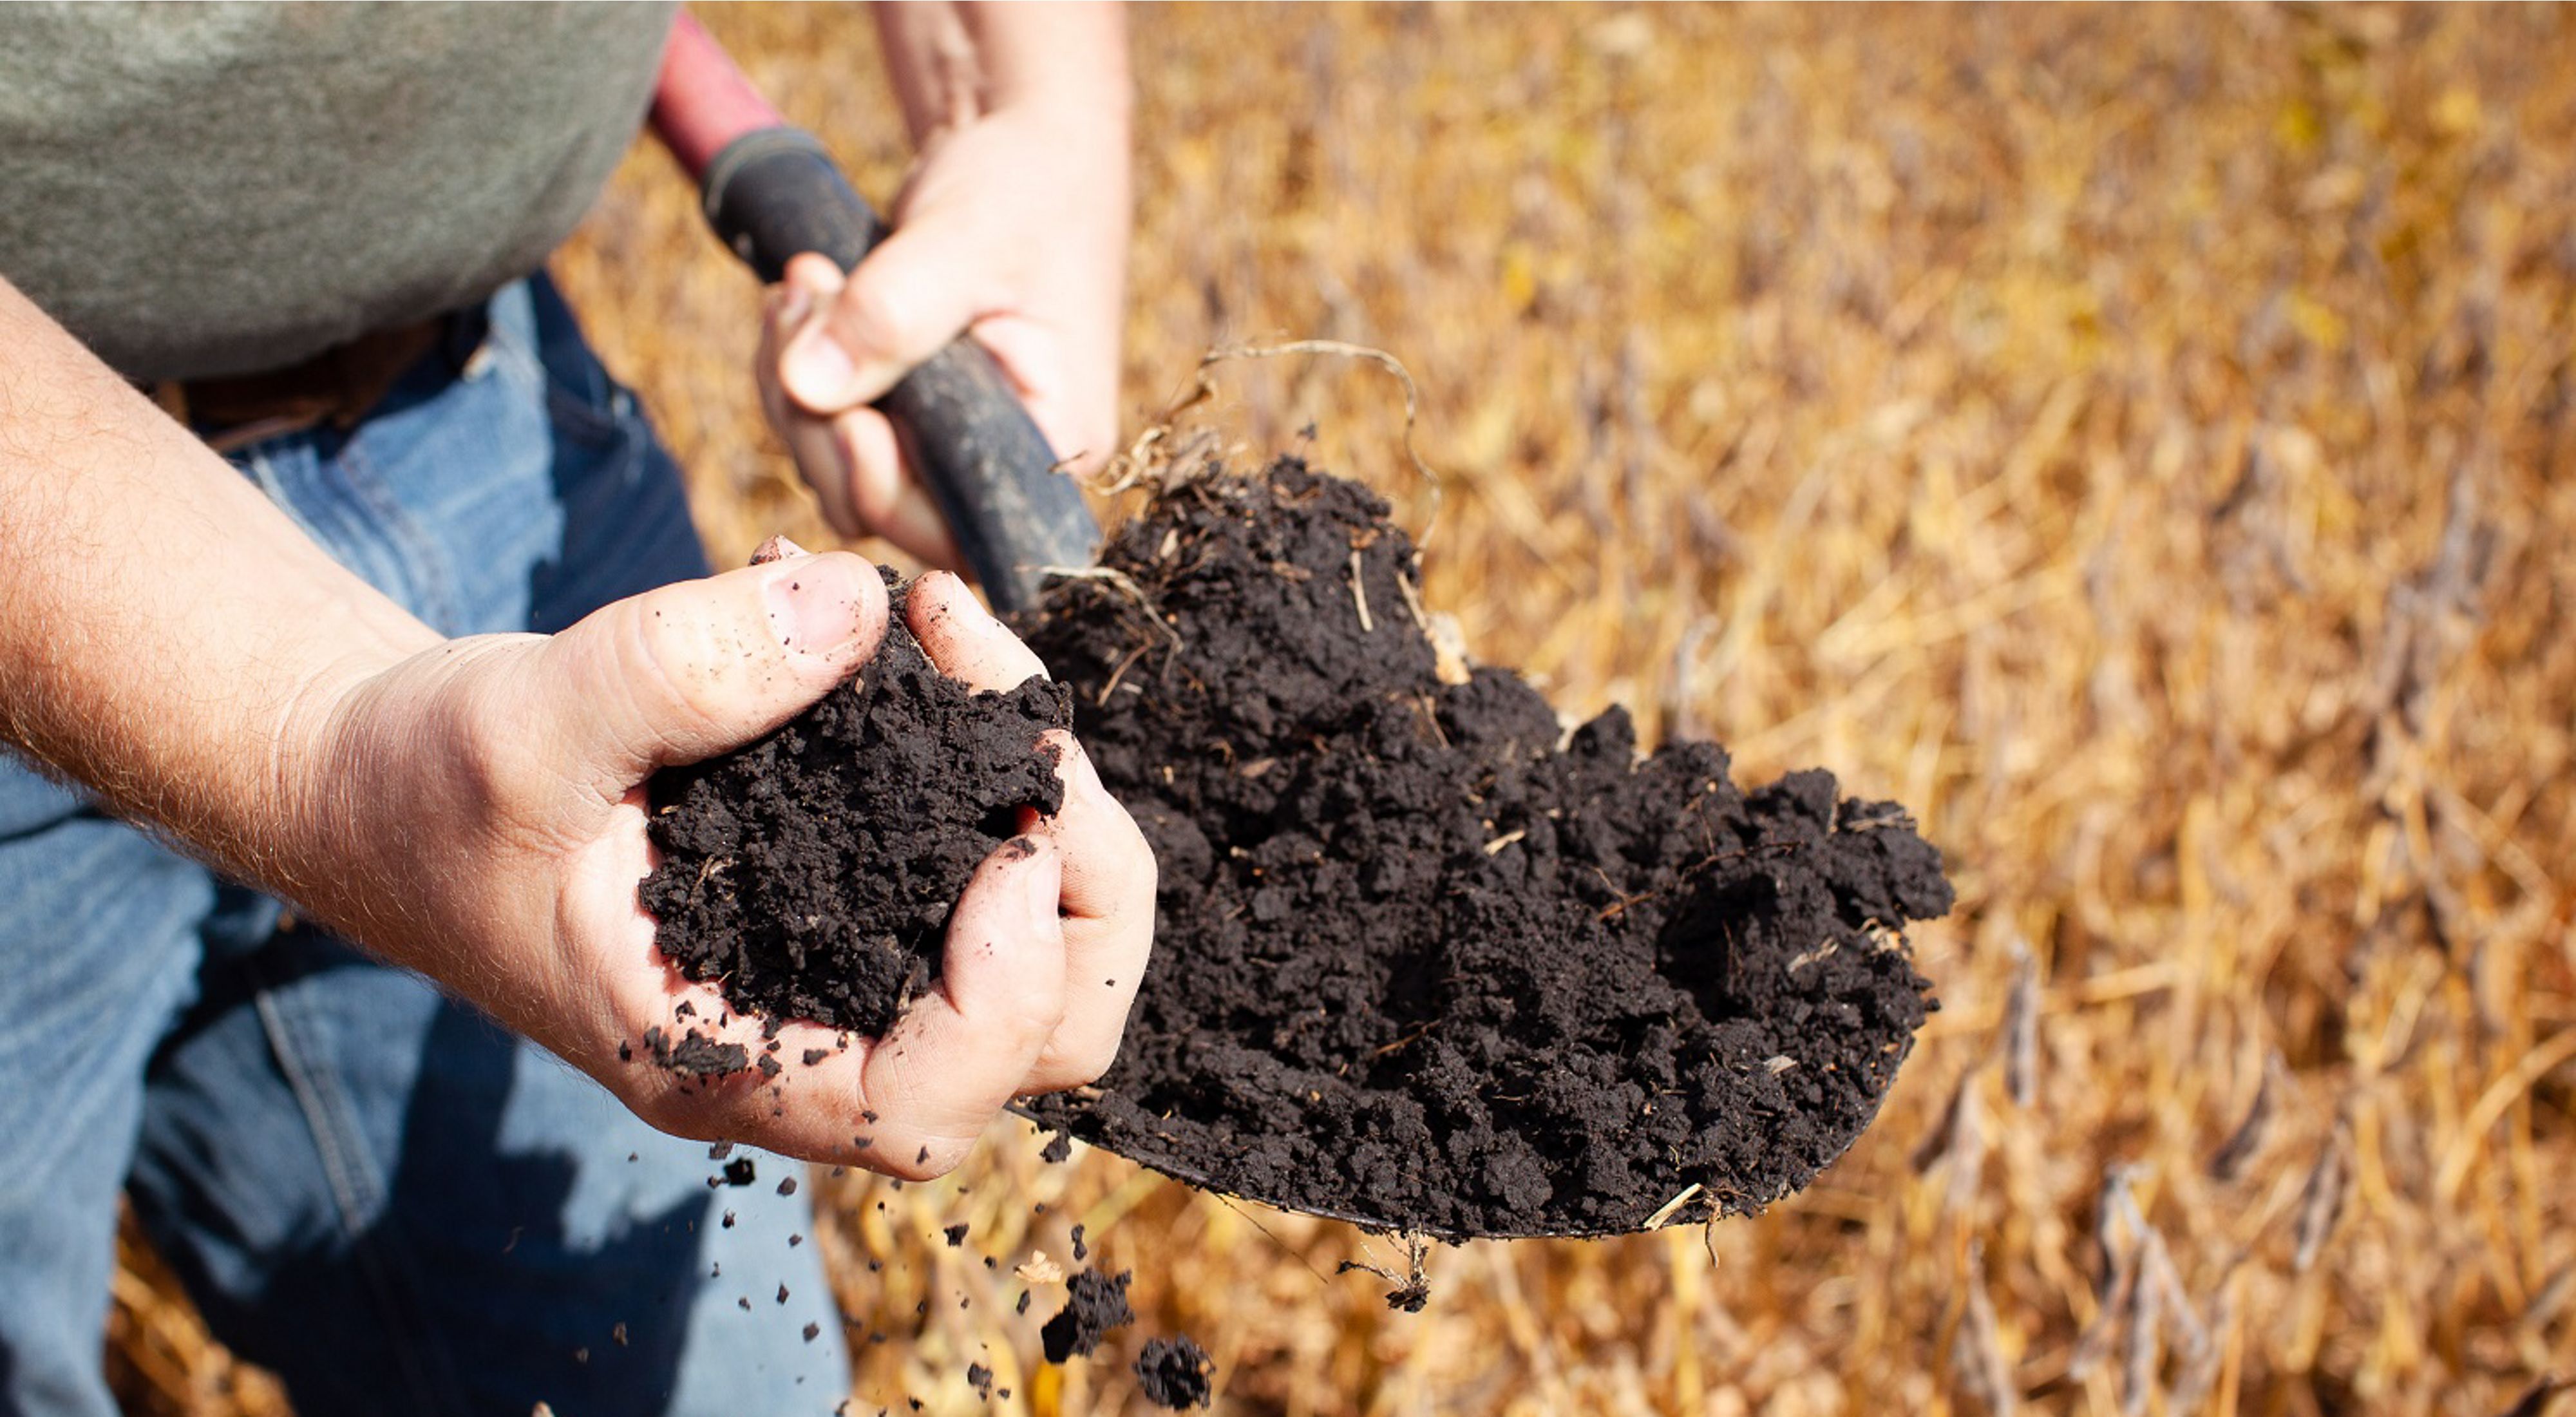 A fistful of healthy soil crumbles in a farmers hand.